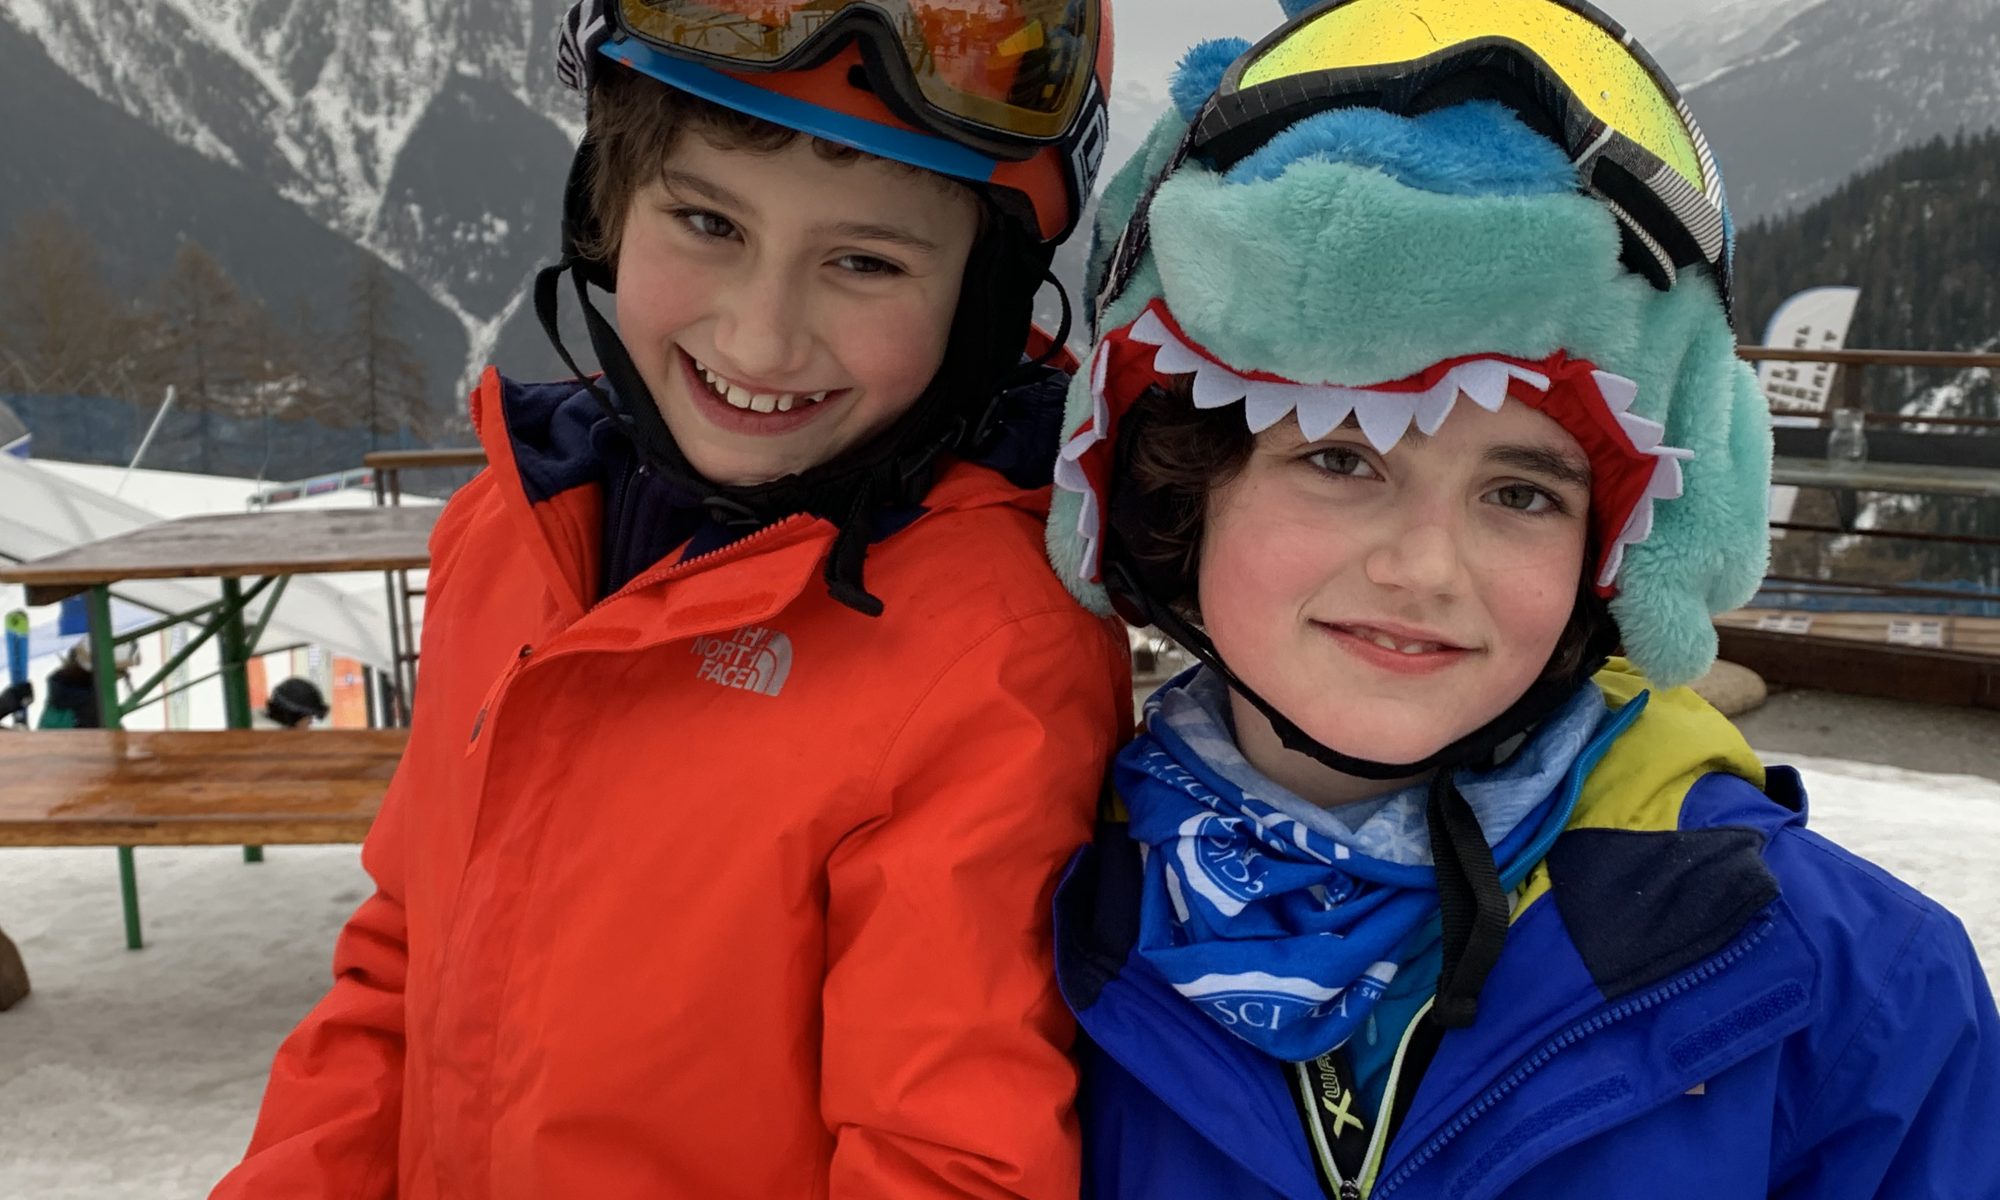 Our half term ski-safari holiday based in the Valdigne of Aosta Valley- Courmayeur, Pila and La Thuile. The boys happy after a great ski day.